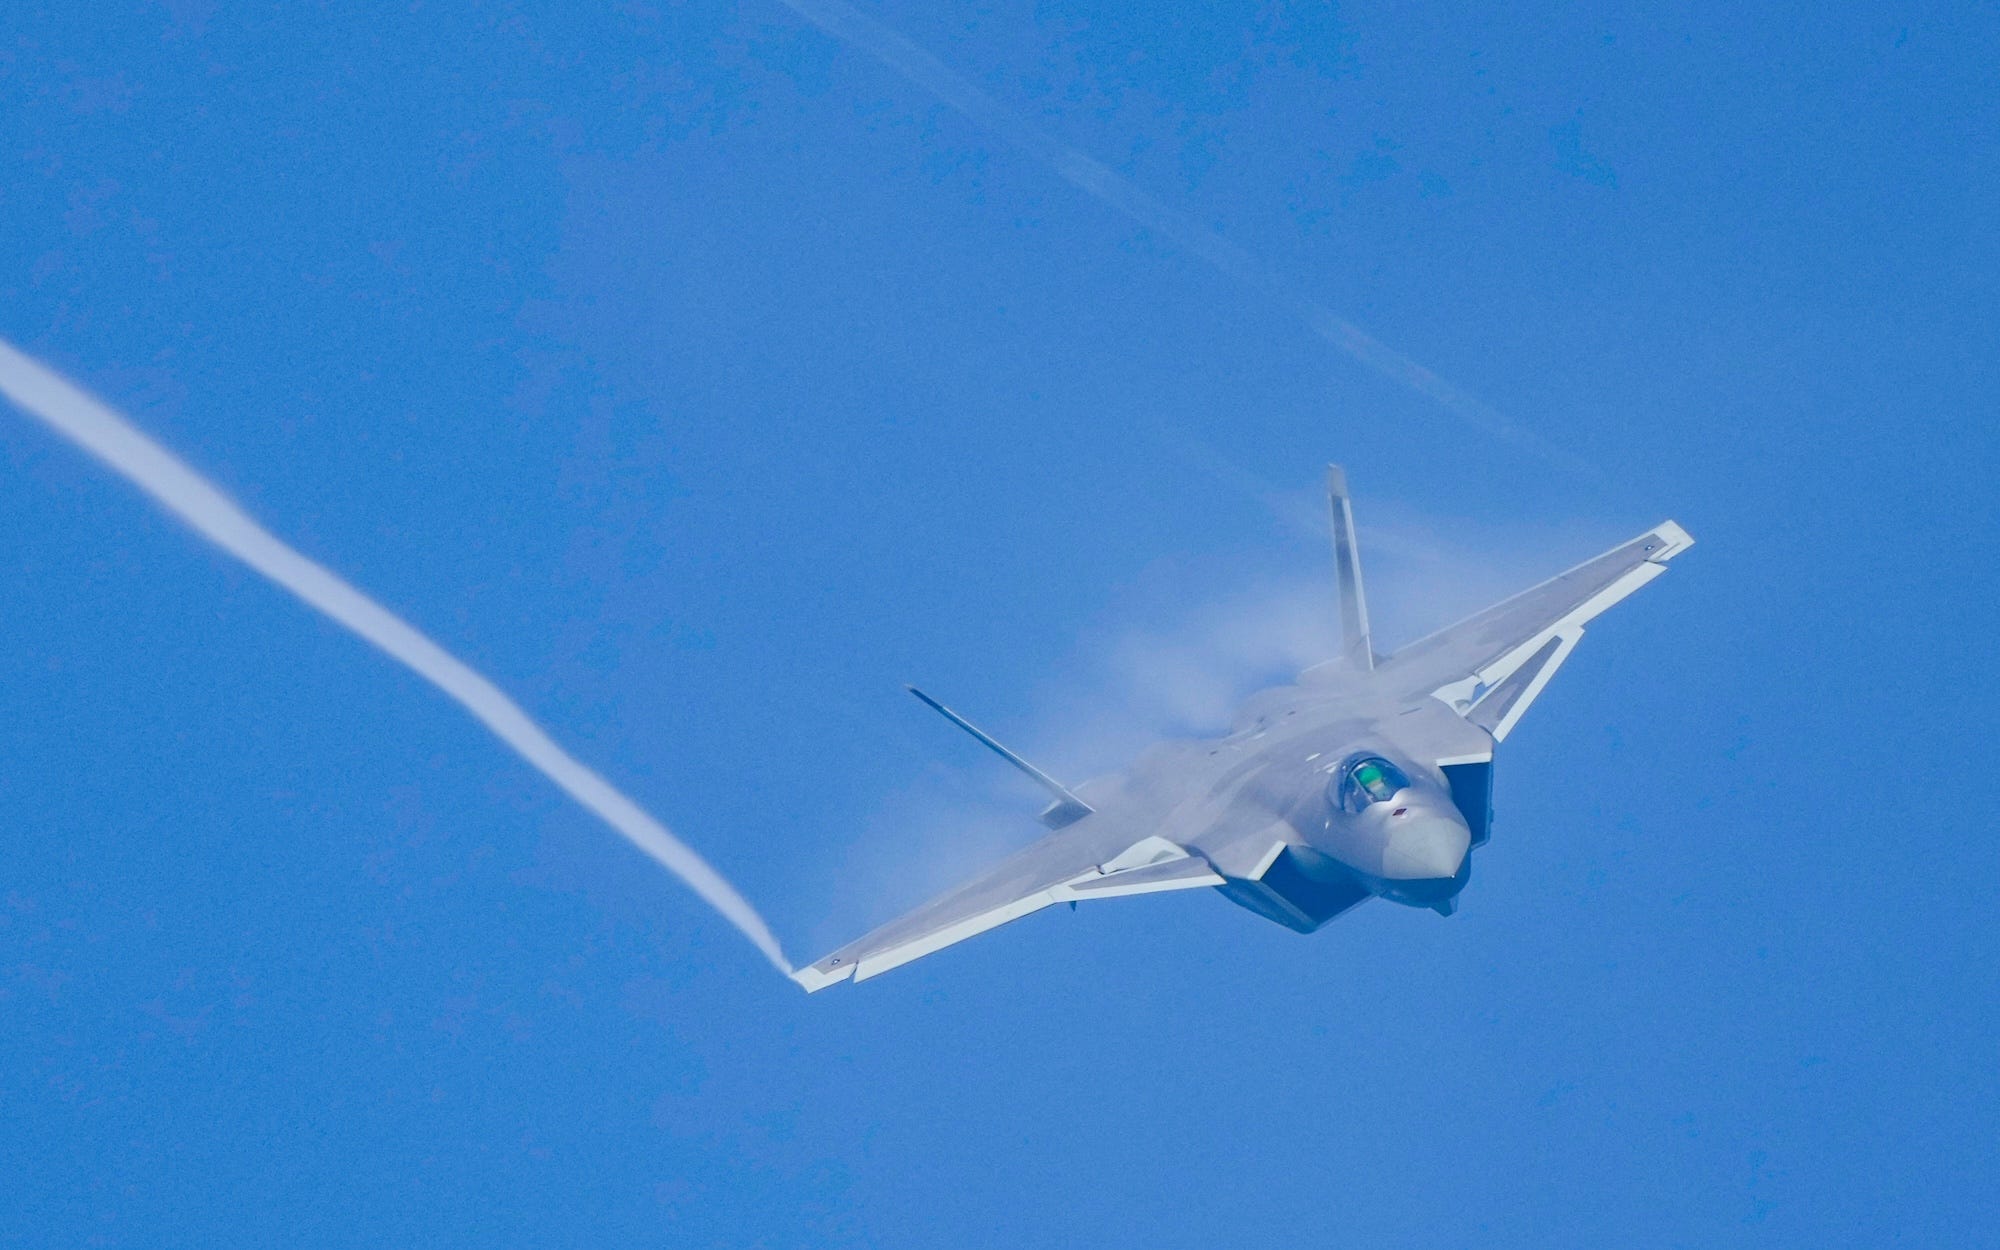 microsoft, a us ally is forging ties with china's air force but probably won't get its j-20 stealth fighter